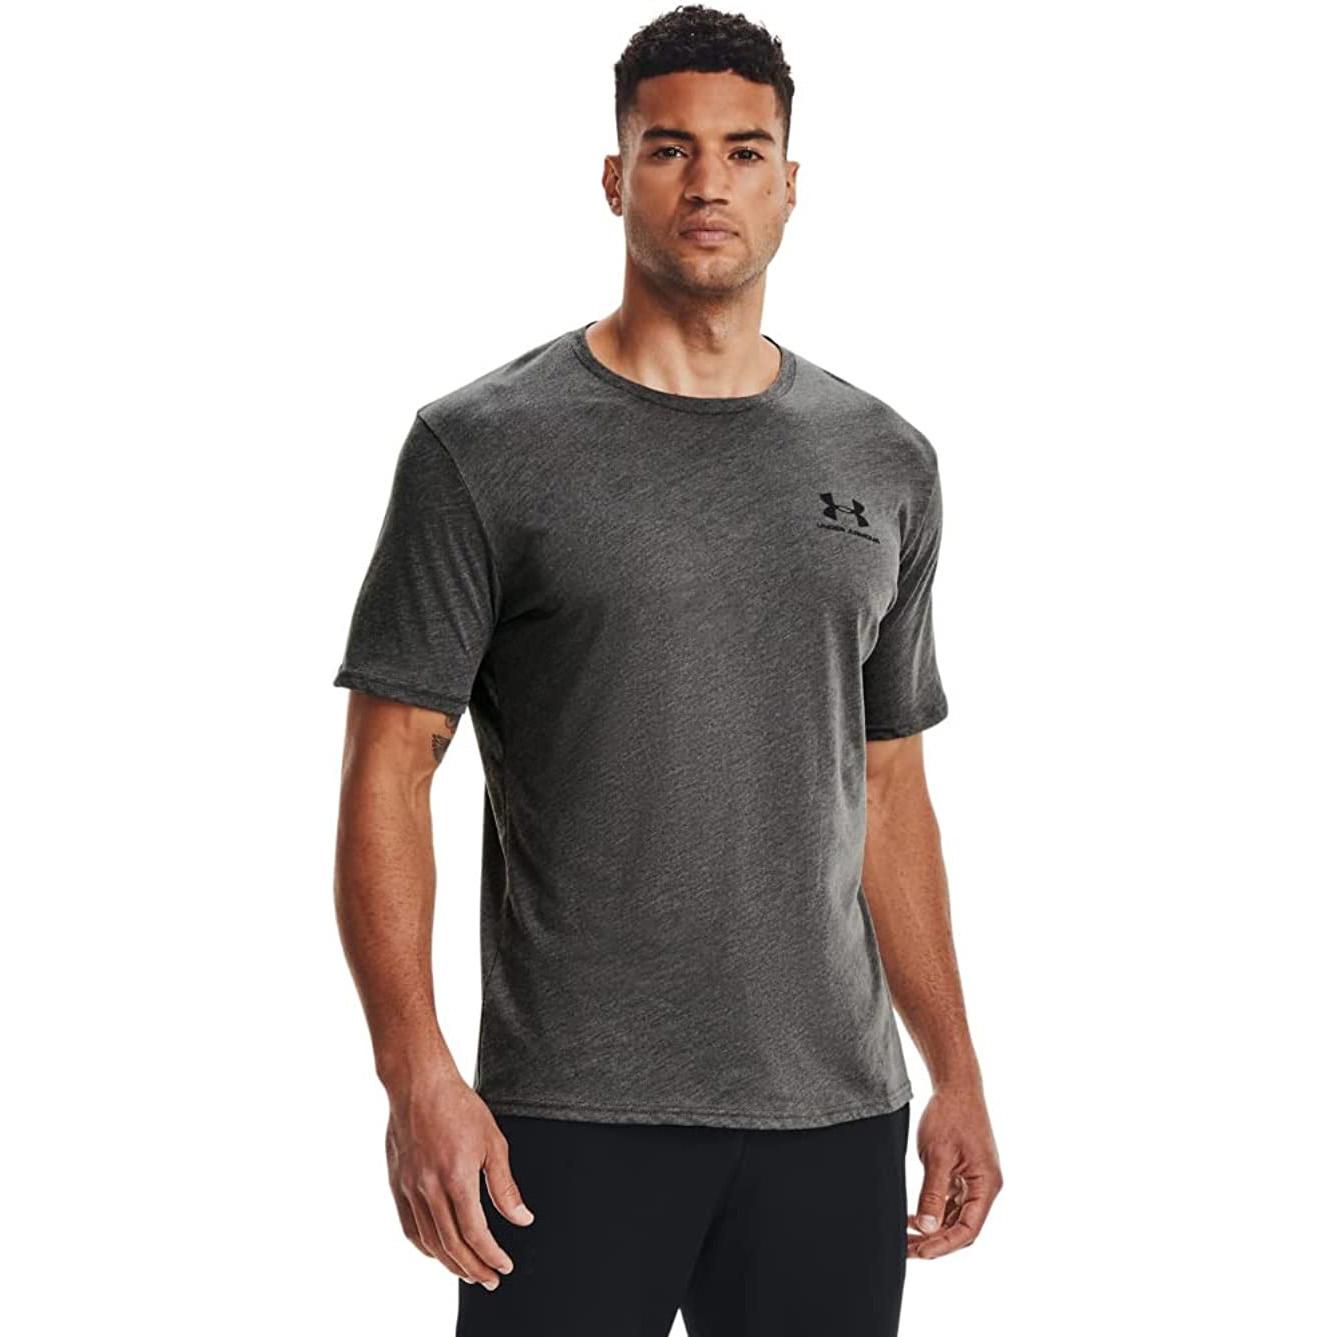 Under Armour Mens Sportstyle Left Chest Short Sleeve T-shirt for $11.97